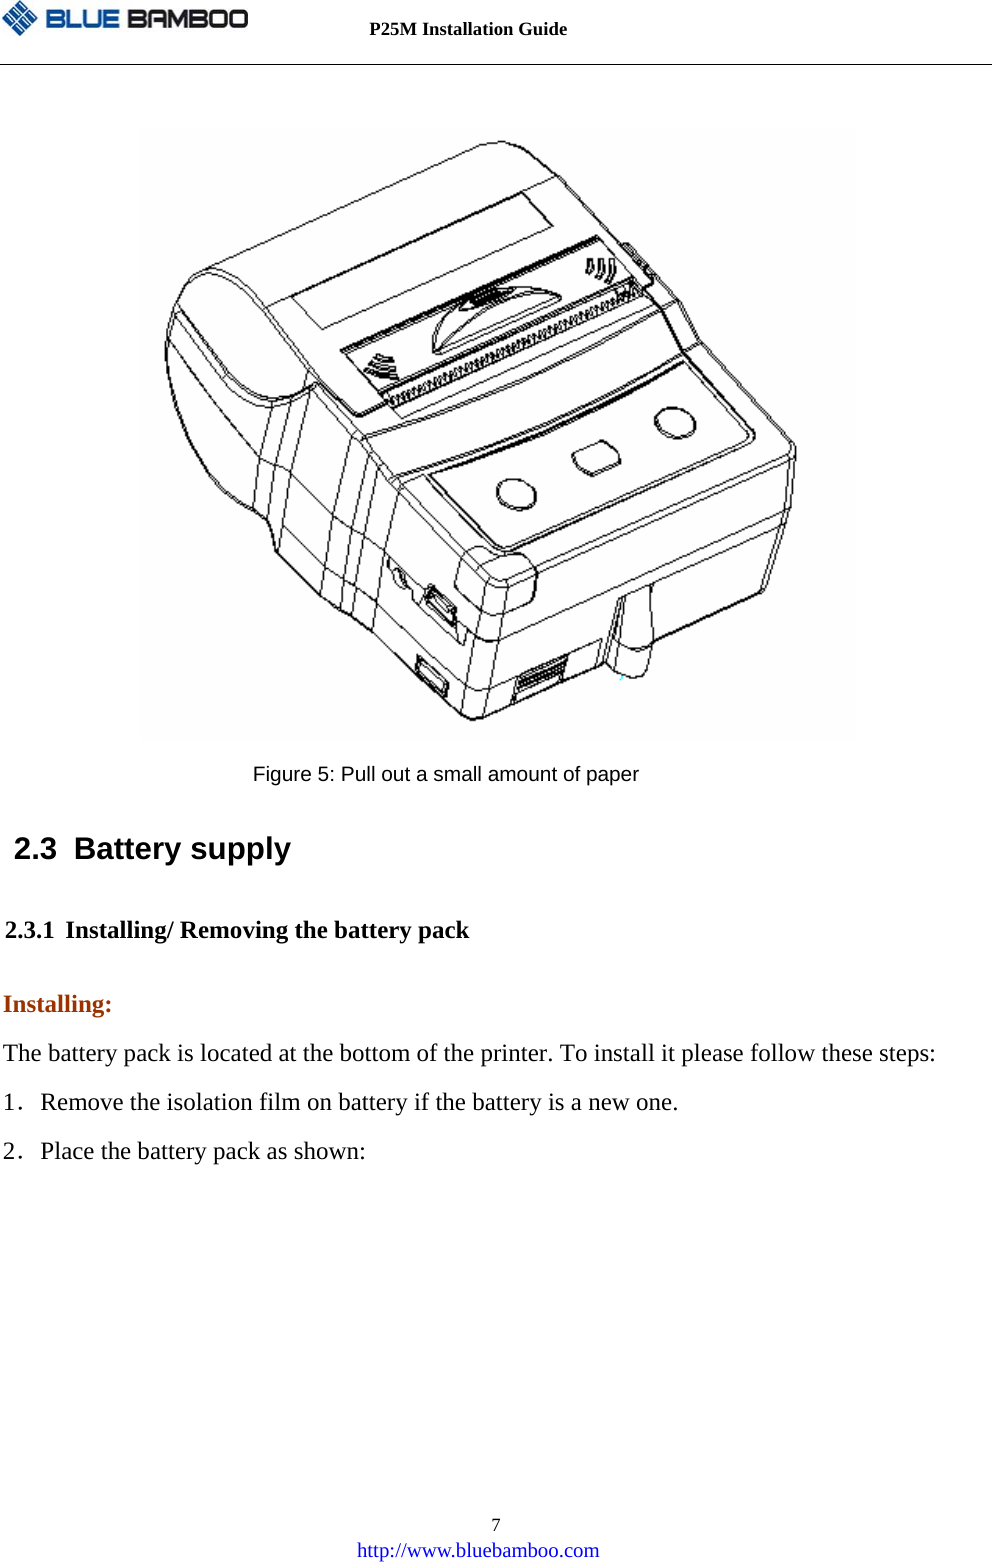          P25M Installation Guide   http://www.bluebamboo.com 7                     Figure 5: Pull out a small amount of paper 2.3 Battery supply 2.3.1 Installing/ Removing the battery pack Installing: The battery pack is located at the bottom of the printer. To install it please follow these steps: 1．Remove the isolation film on battery if the battery is a new one. 2．Place the battery pack as shown: 